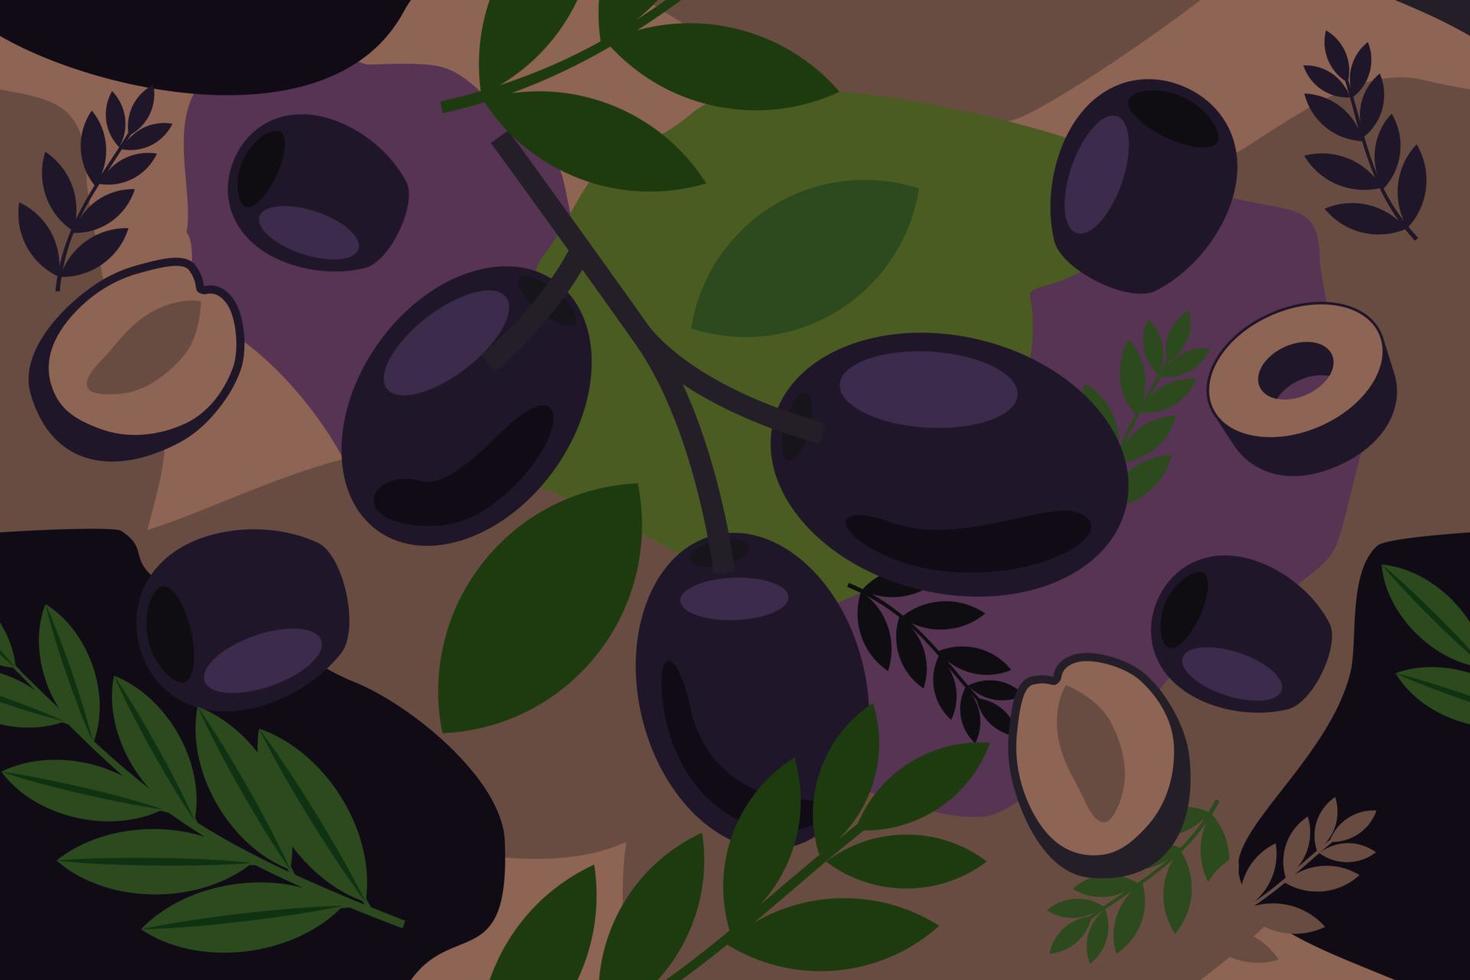 Black Olive seamless elements abstract pattern vector design background